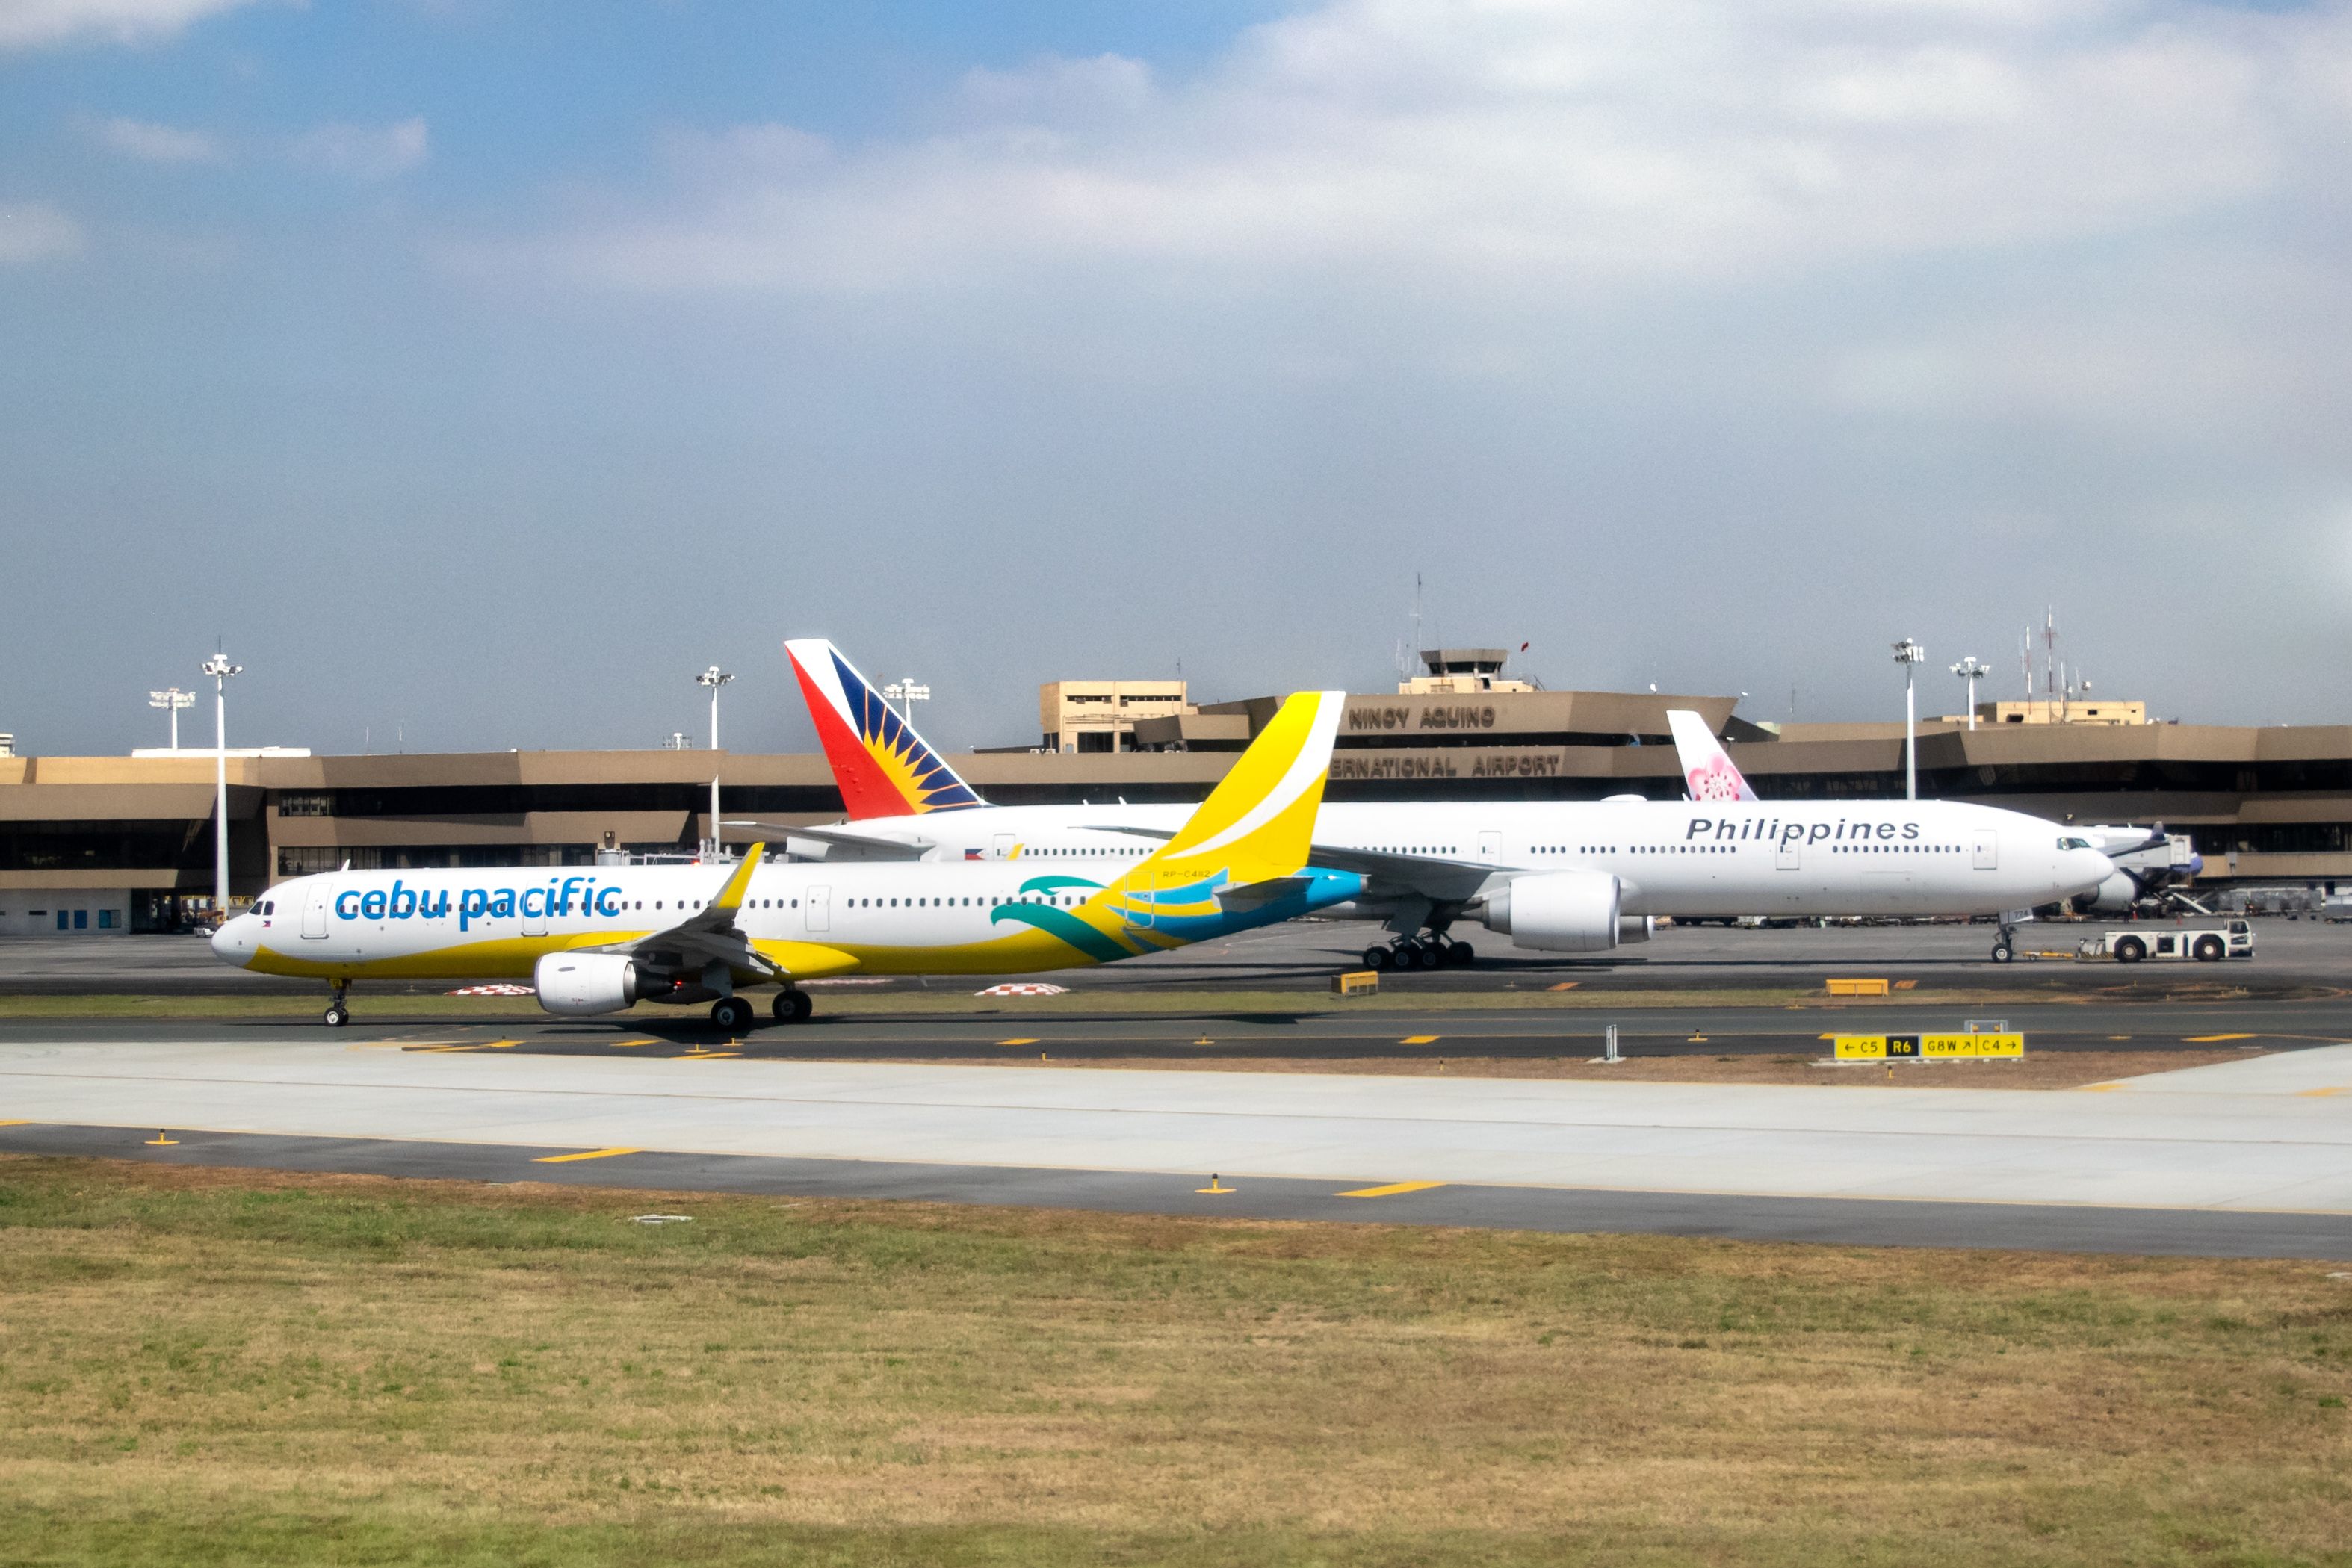 A Cebu Pacific Airbus A321 taxis in front of a Philippine Airlines Boeing 777 at Manila's Ninoy Aquino International Airport